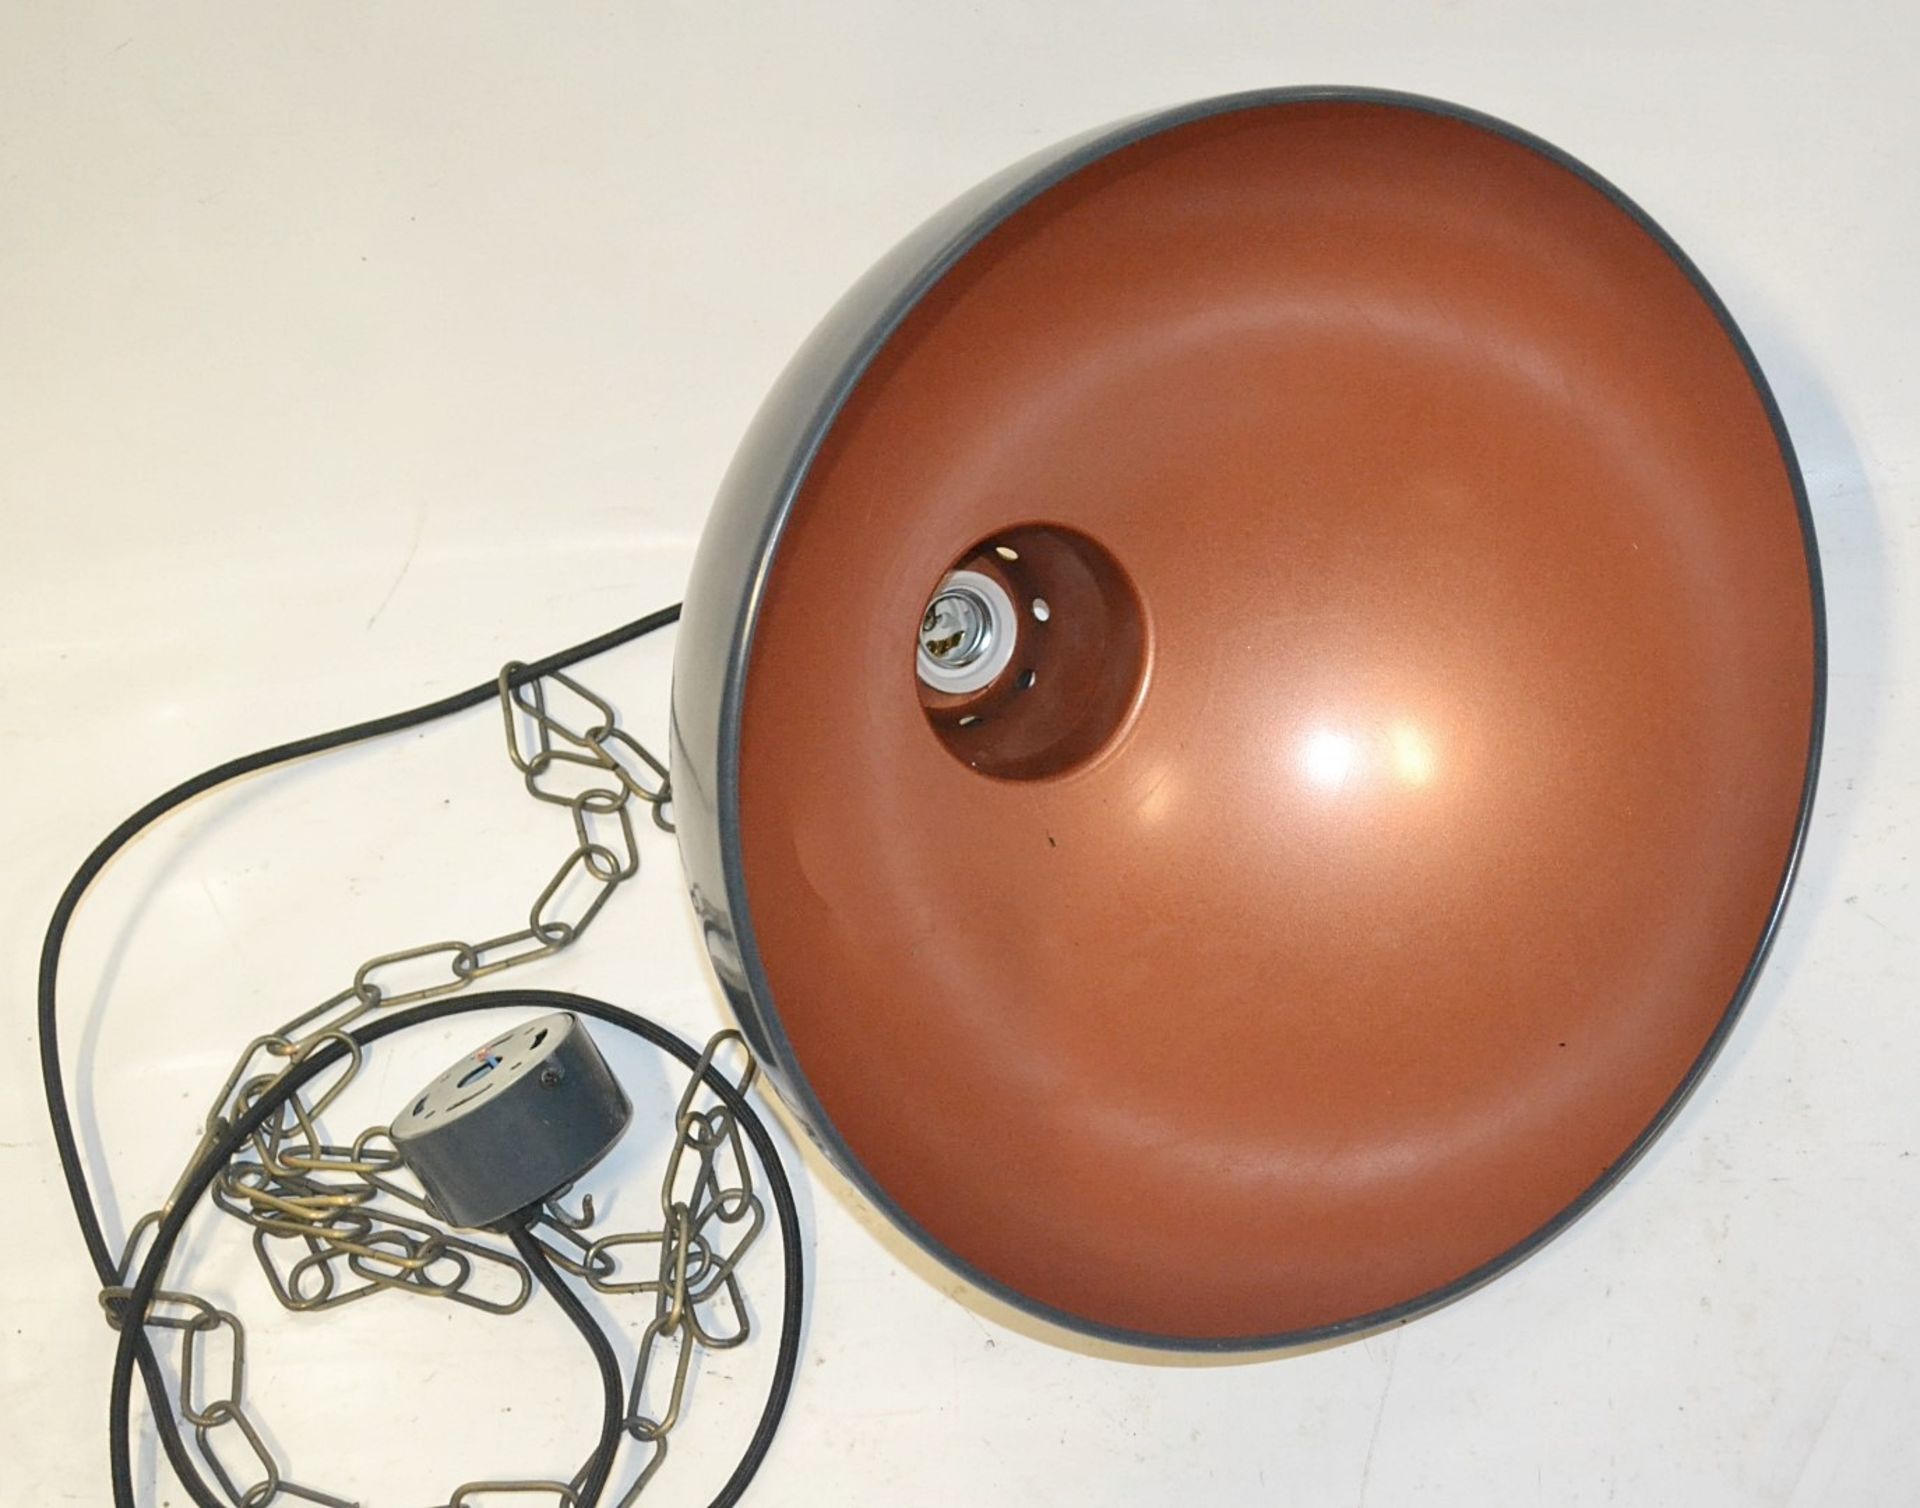 2 x Dome Pendant Ceiling Light Fittings With Chain And Black Fabric Flex - CL353 - Image 3 of 6